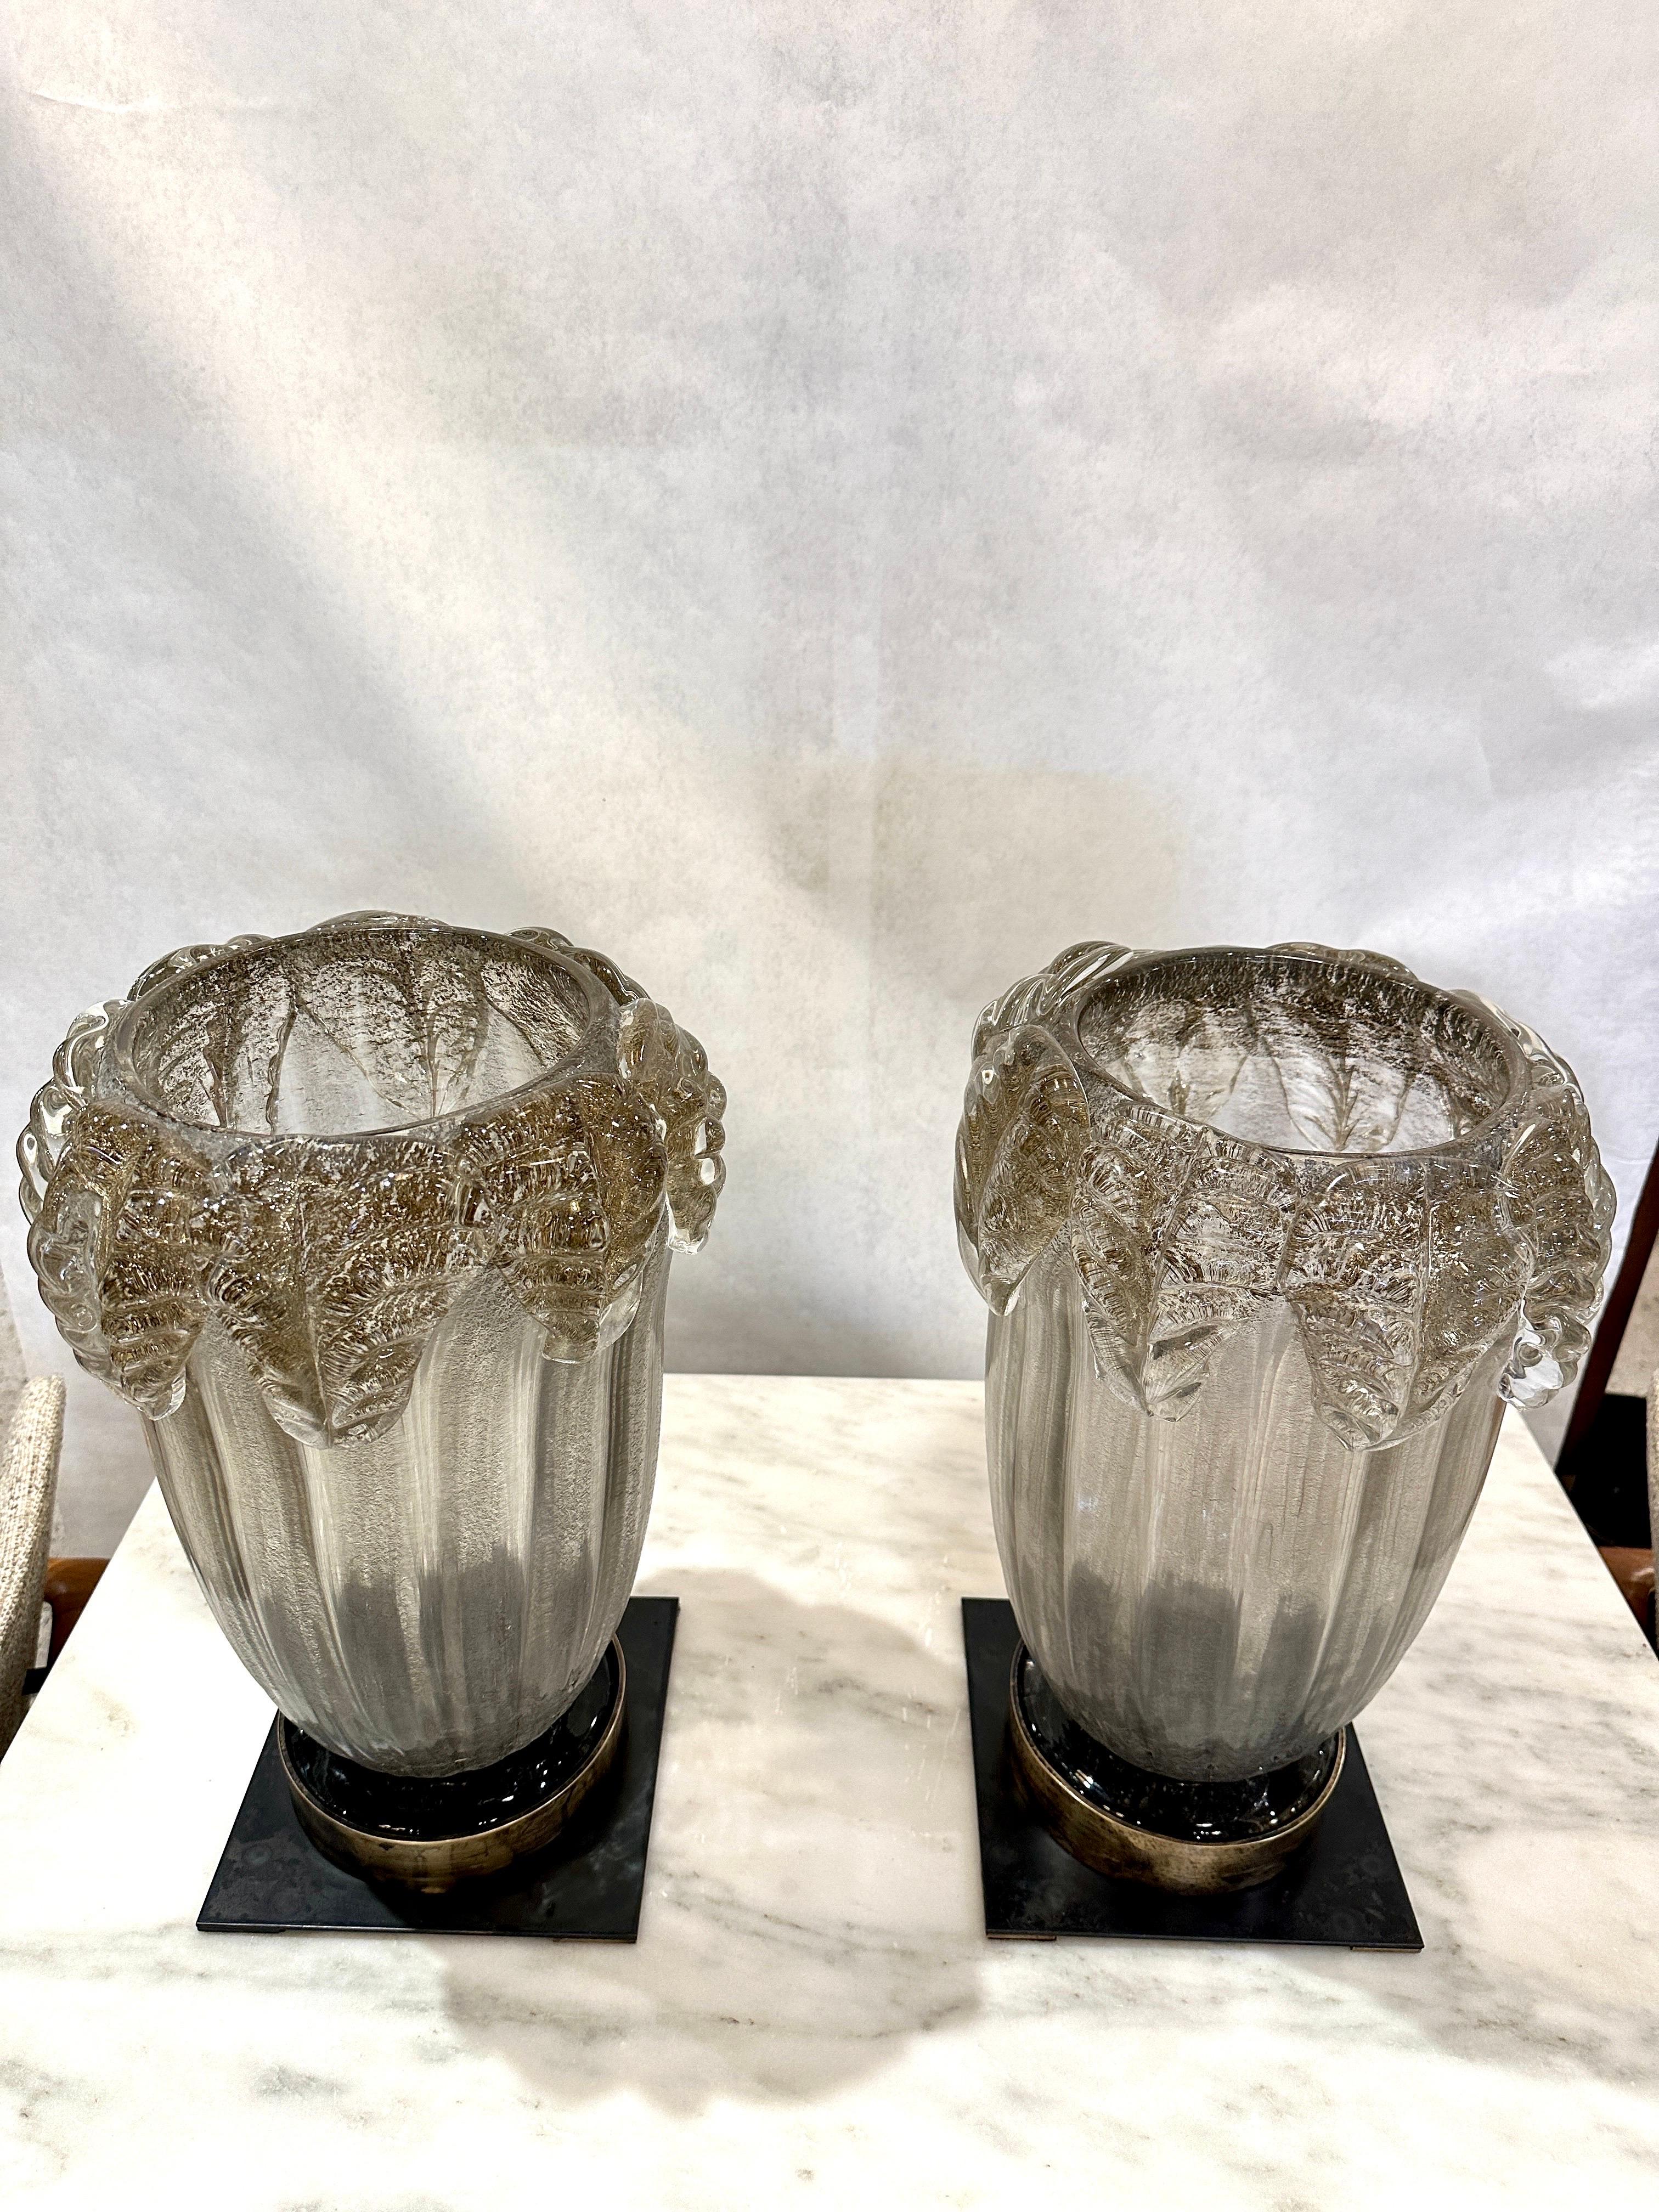 These are VERY large Murano glass tall hurricane lanterns with bronze bases and brass candle holders to interiors.  These are a rich gray w/ subtle gold tones embedded in the glass, adorned at top rim with leaves. THIS ITEM IS LOCATED AND WILL SHIP